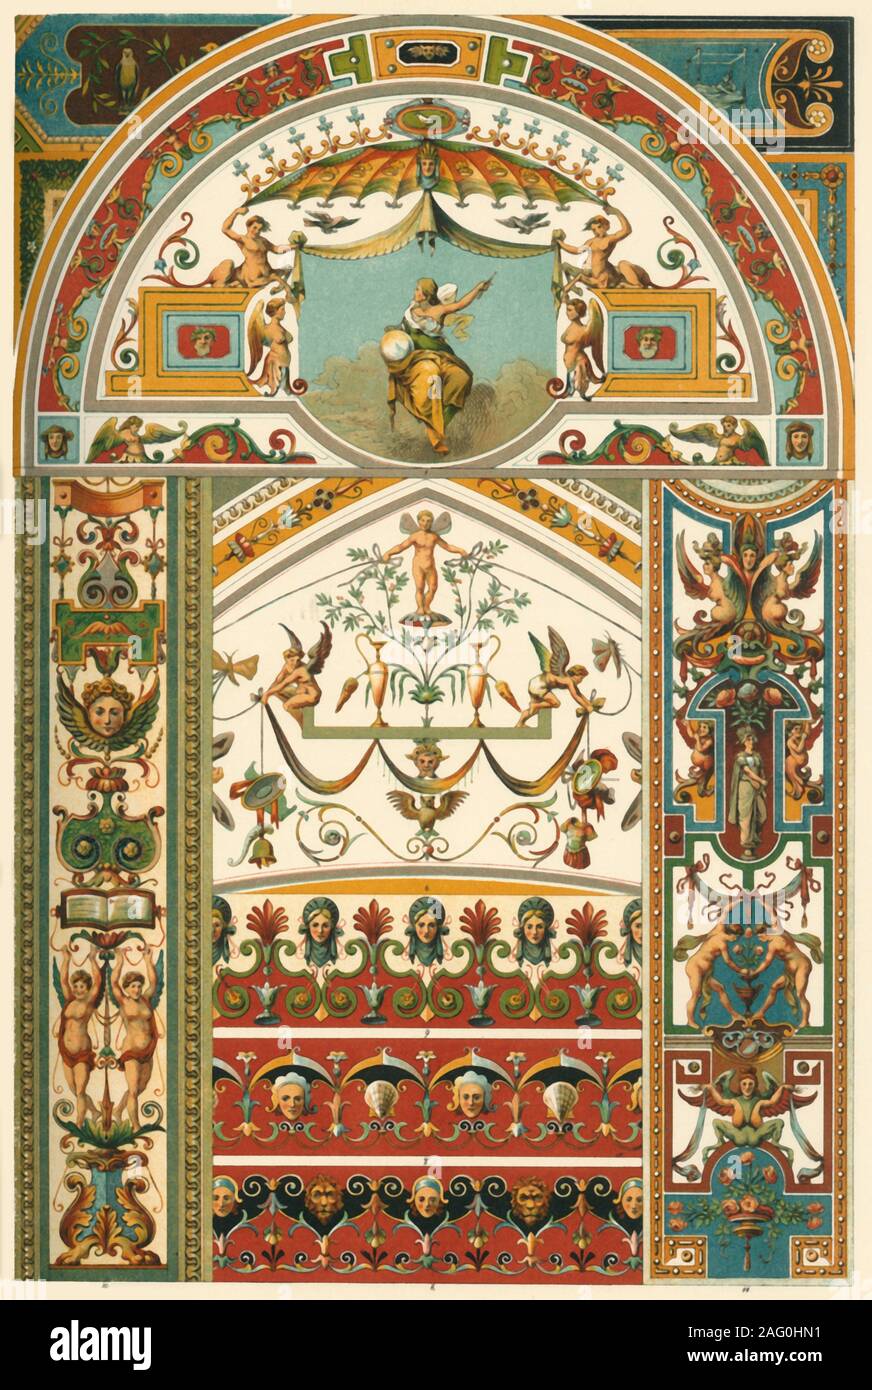 Italian Renaissance ceiling and wall painting, (1898). 'Fig 1: Tympanum from the Sala Ducale in the Vatican at Rome. Figs 2-5: Details from the Loggie of Raffaelle ibid. Fig 6: Severey above the fountain-hall of the Villa di Papa Giulio at Rome. Figs 7 and 8: Plafond-borders in the same Villa. Figs 9 and 10: Pilaster-panels from a chapel in S. Maria Aracelli at Rome. Fig 11: Arch-panel from the cloister of the monastery S. Maria sopra Minerva at Rome'. Plate 57 from &quot;The Historic Styles of Ornament&quot; translated from the German of H. Dolmetsch. [B.T. Batford, London, 1898] Stock Photo